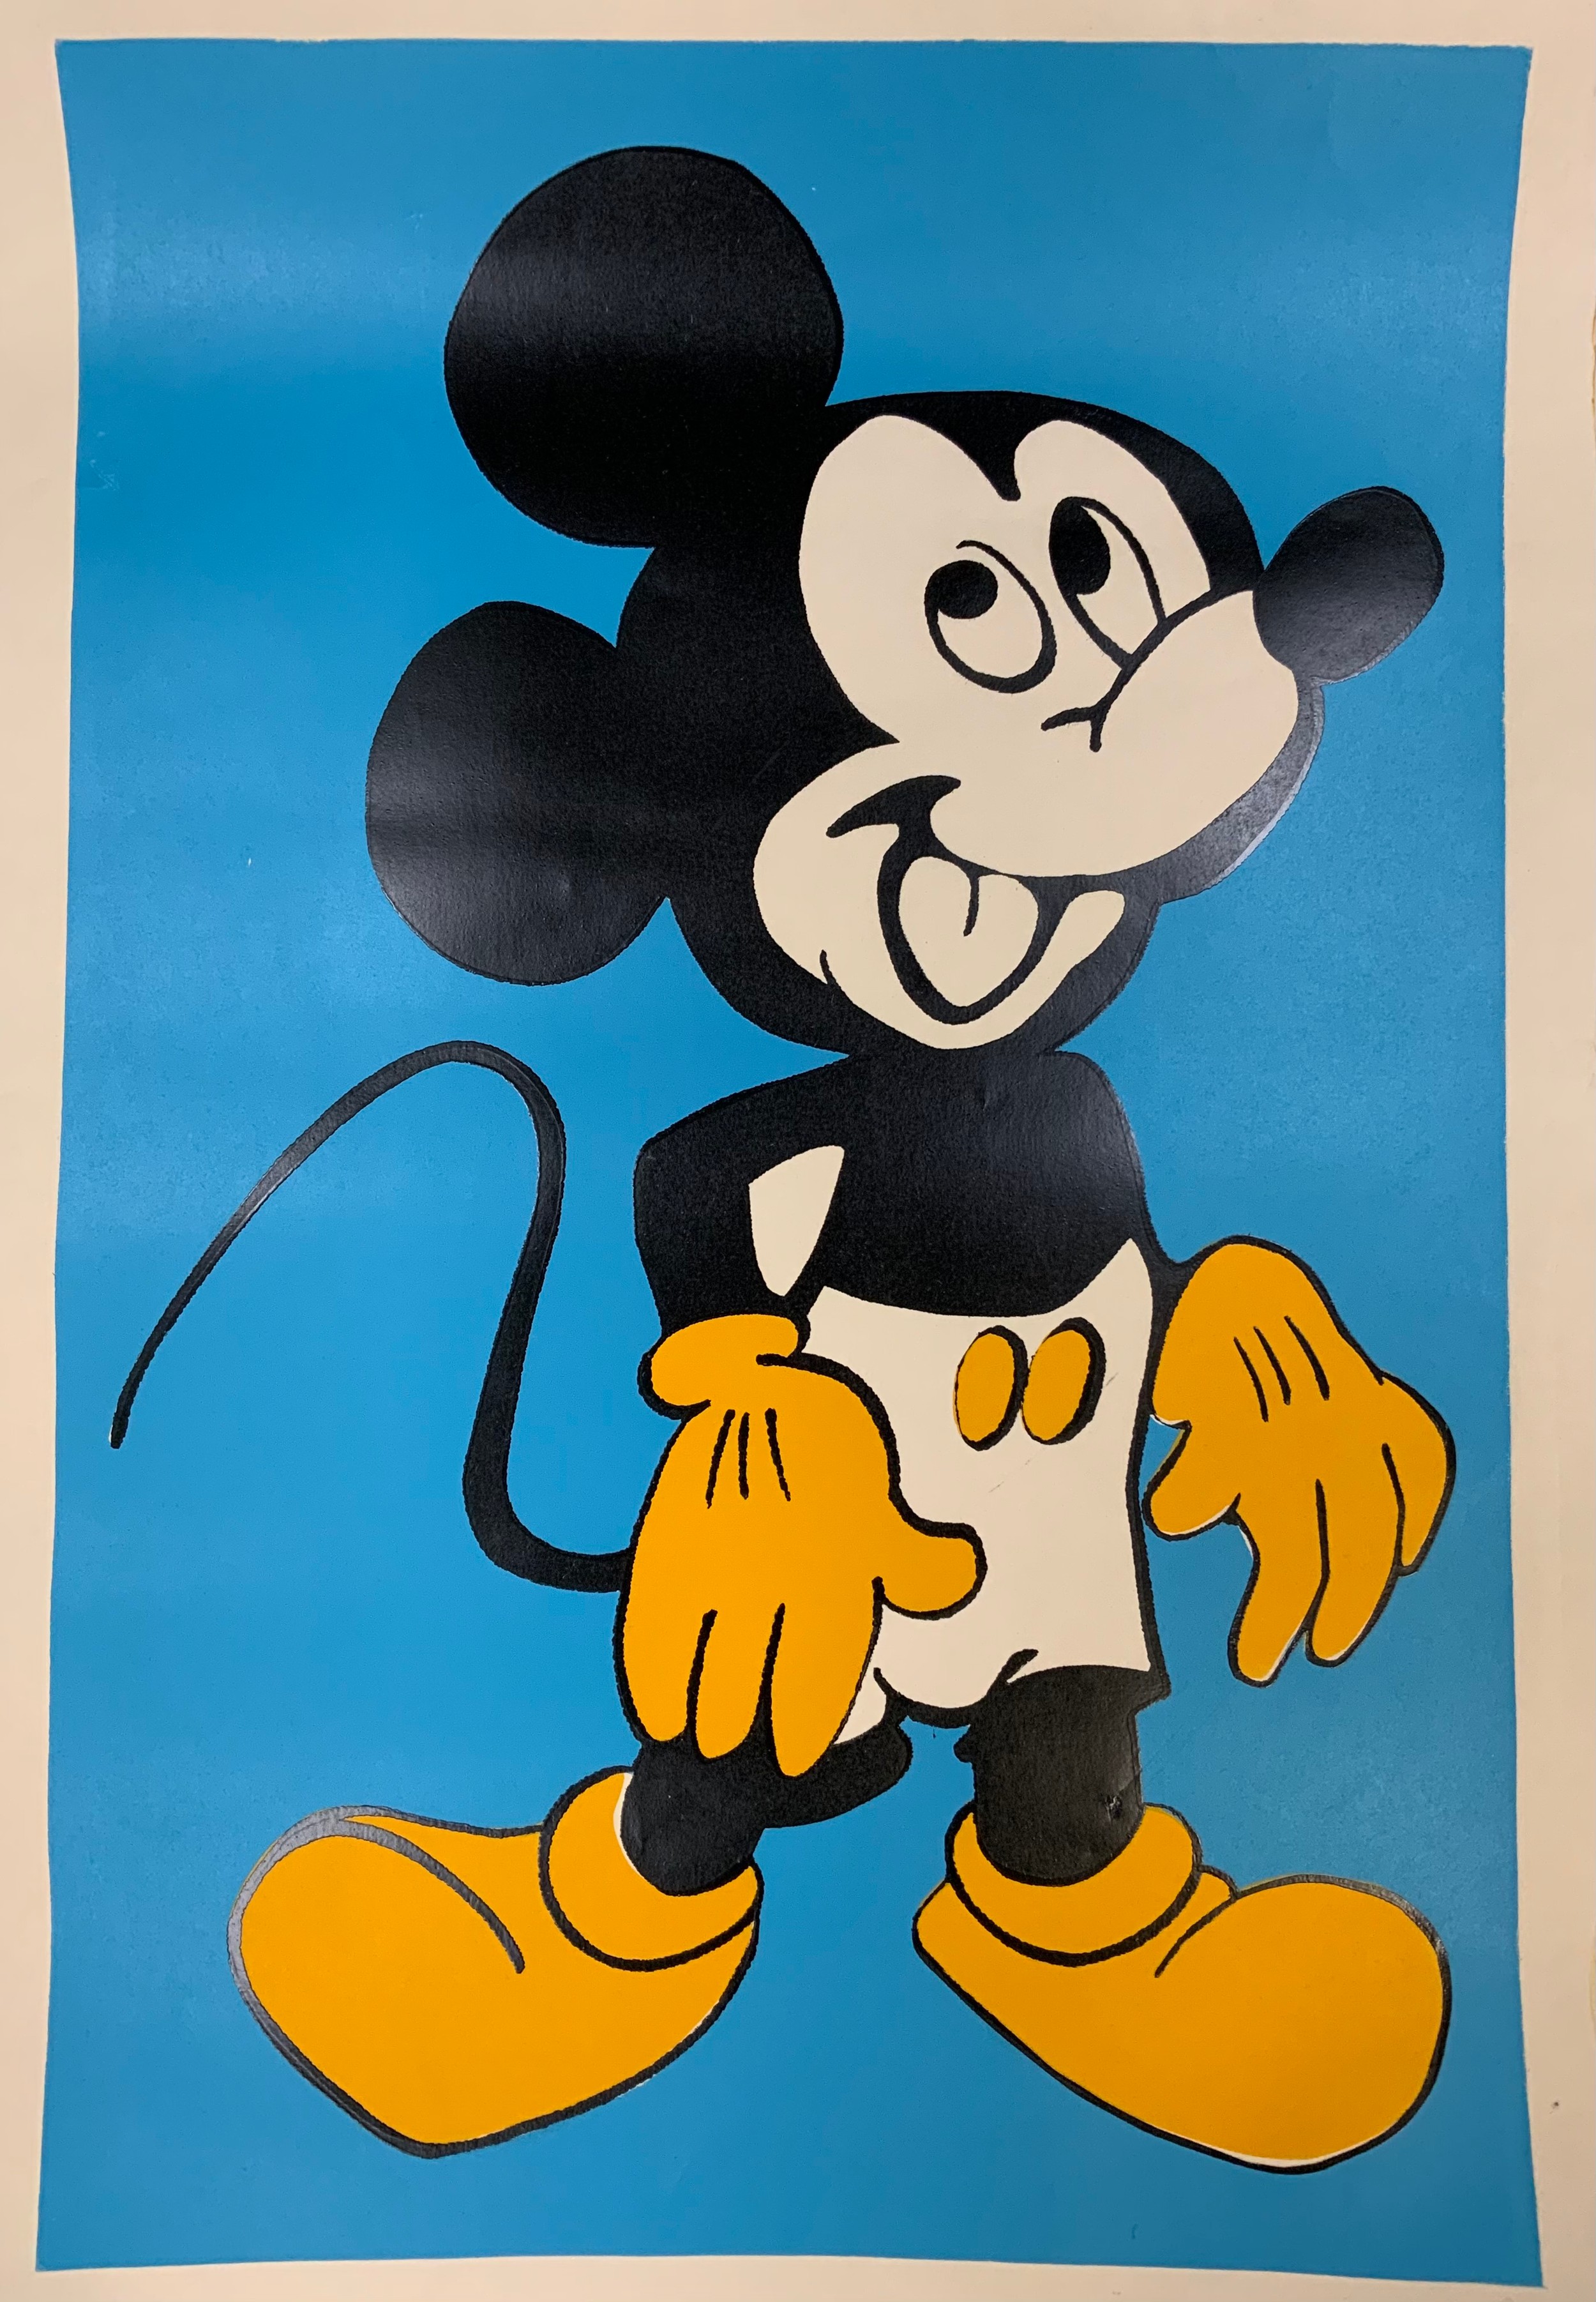 Manner of Andy Warhol, Mickey Mouse, silkscreen in three colours, 61cm x 40.5cm image size (76cm